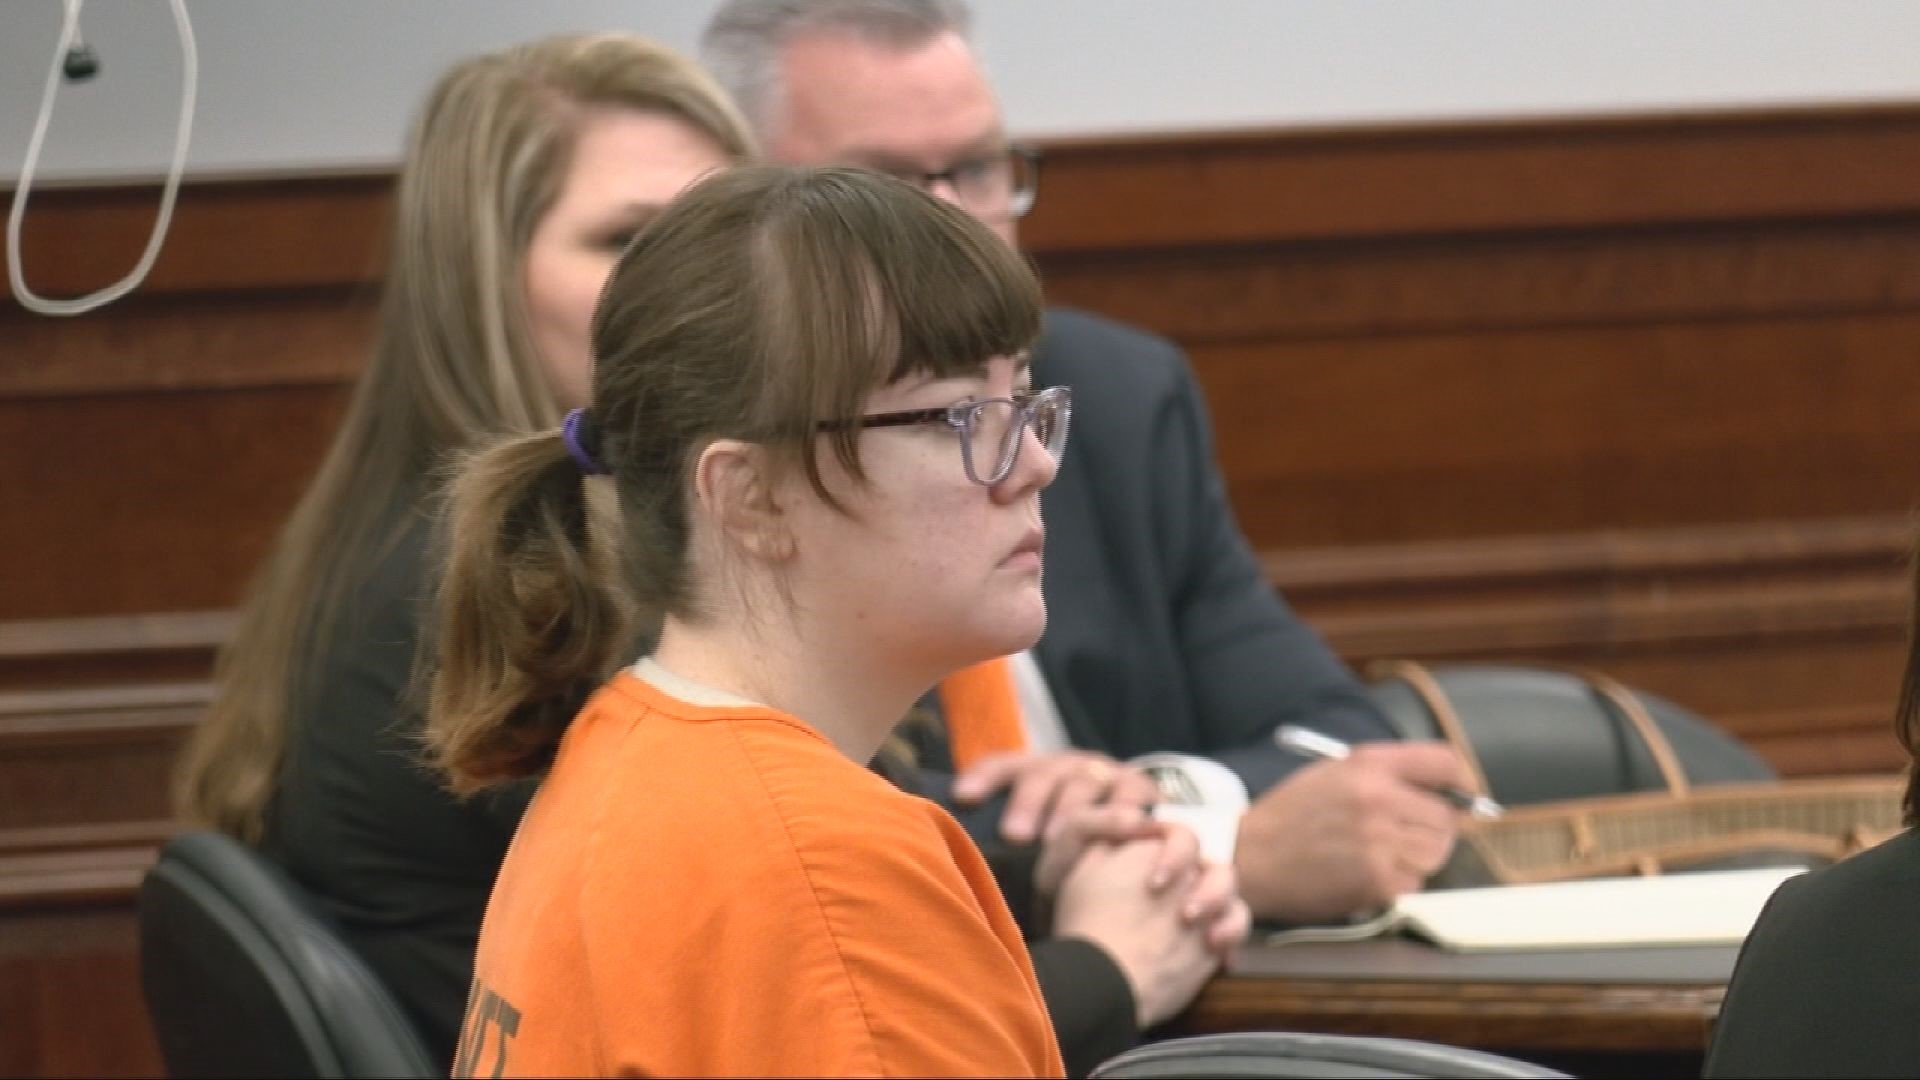 As part of the plea deal, Catherine "Abby" McKinney will testify against her boyfriend Dakota Hill during his trial later this year.